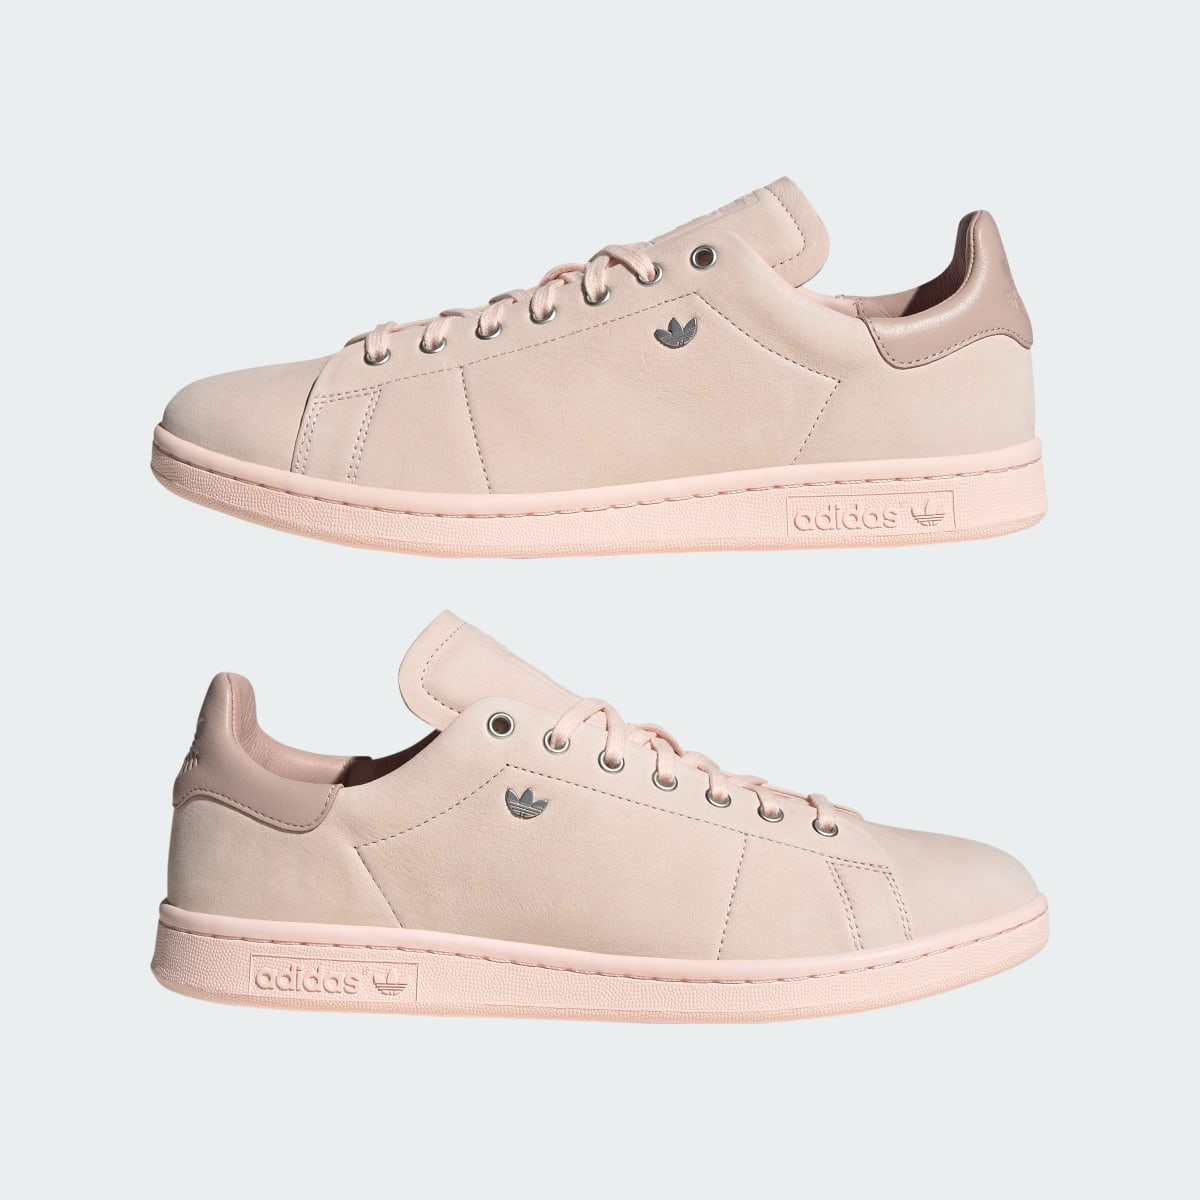 Adidas Chaussure Stan Smith Lux. 8